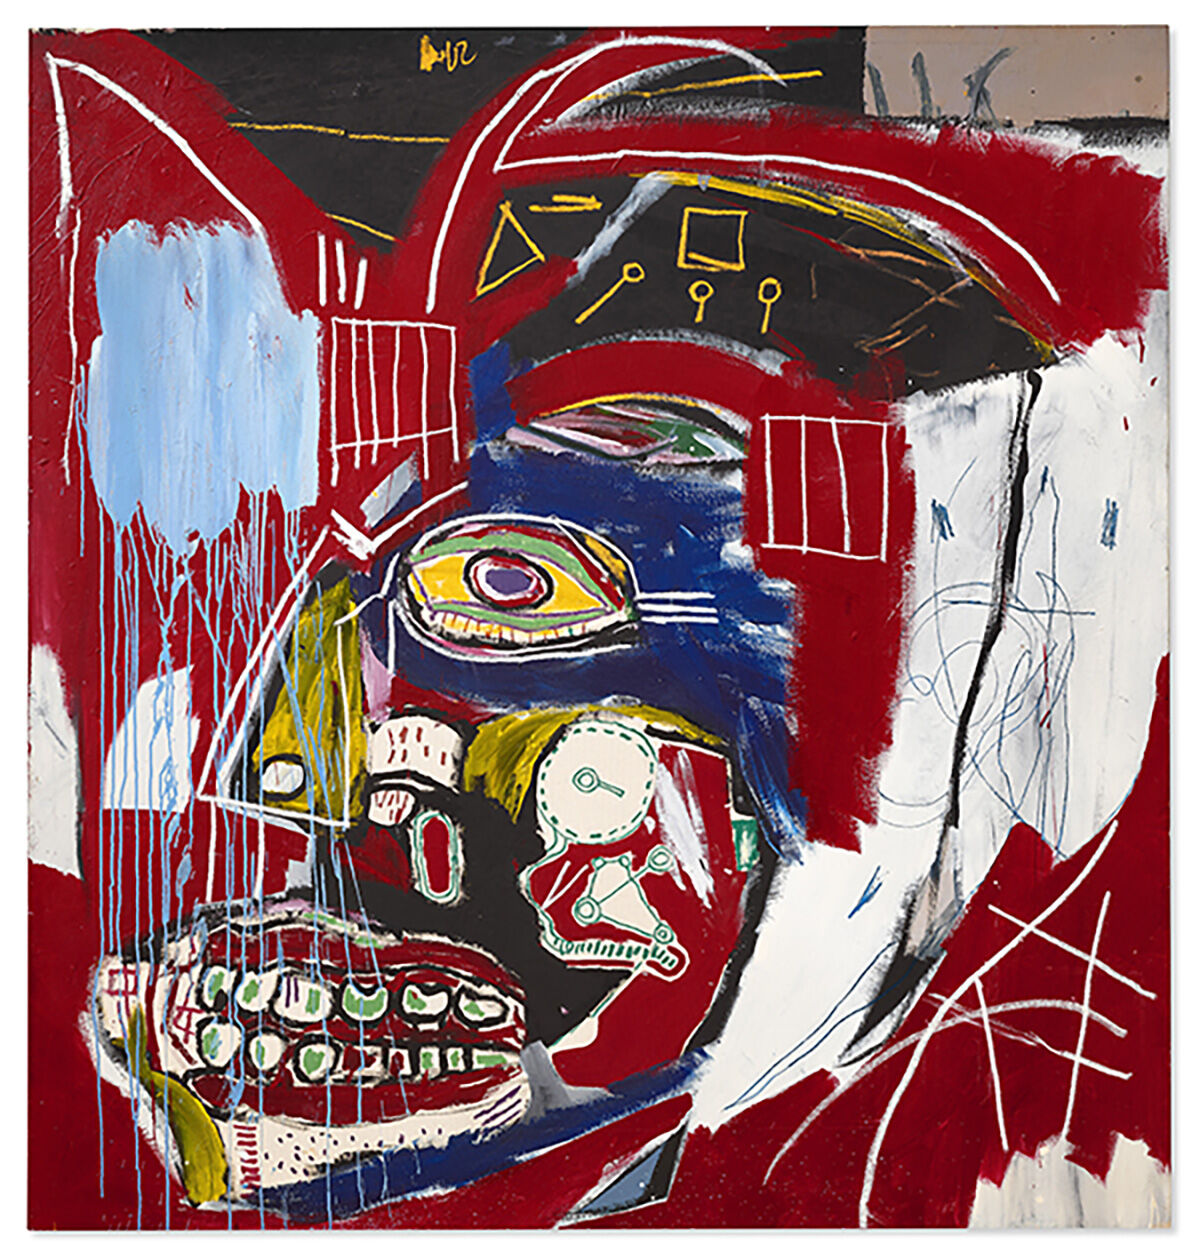 Jean-Michel Basquiat, In This Case, 1983. Courtesy of Christie’s Images Ltd.